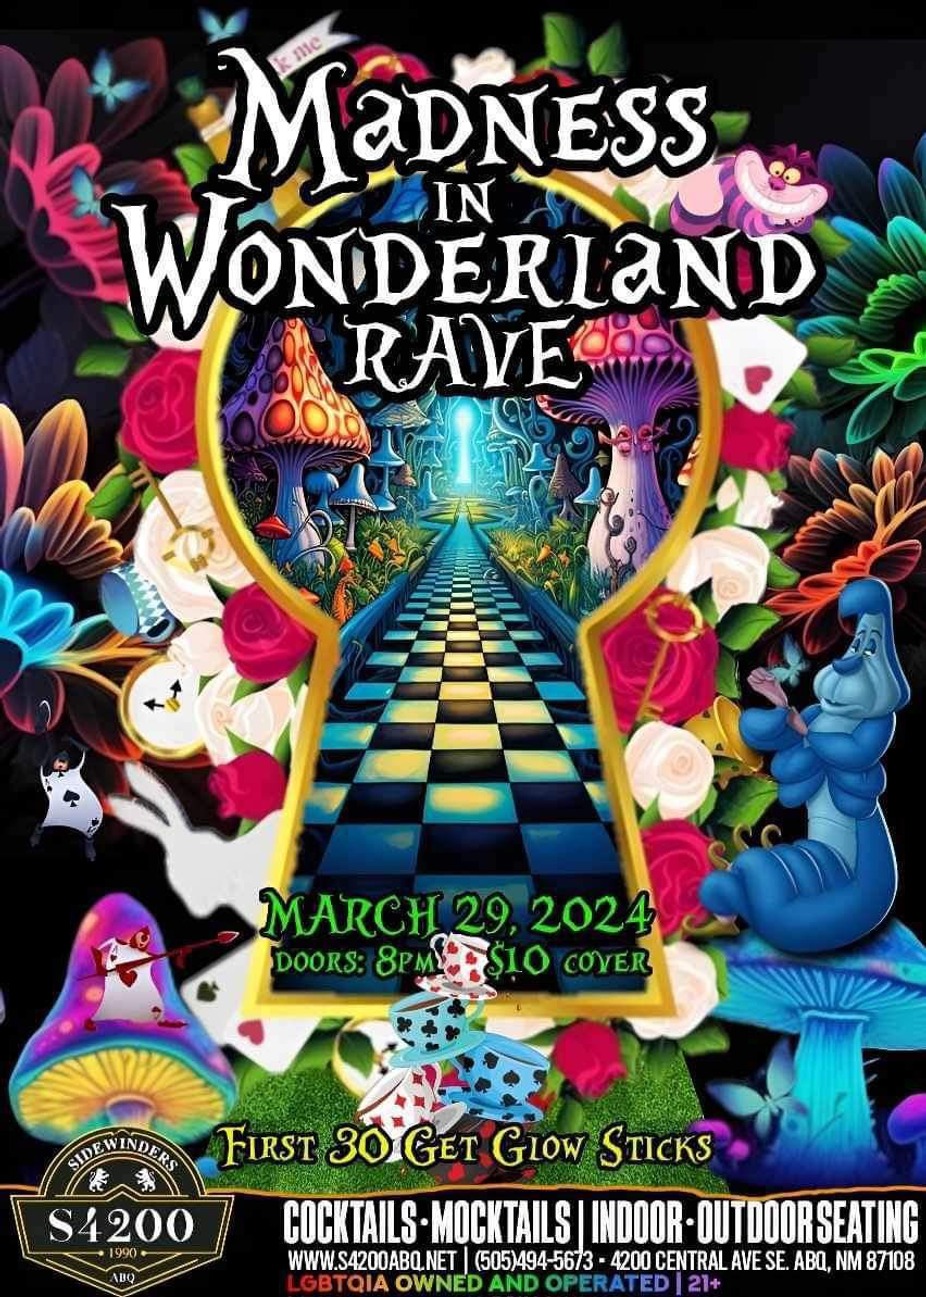 Madness in Wonderland RAVE event photo